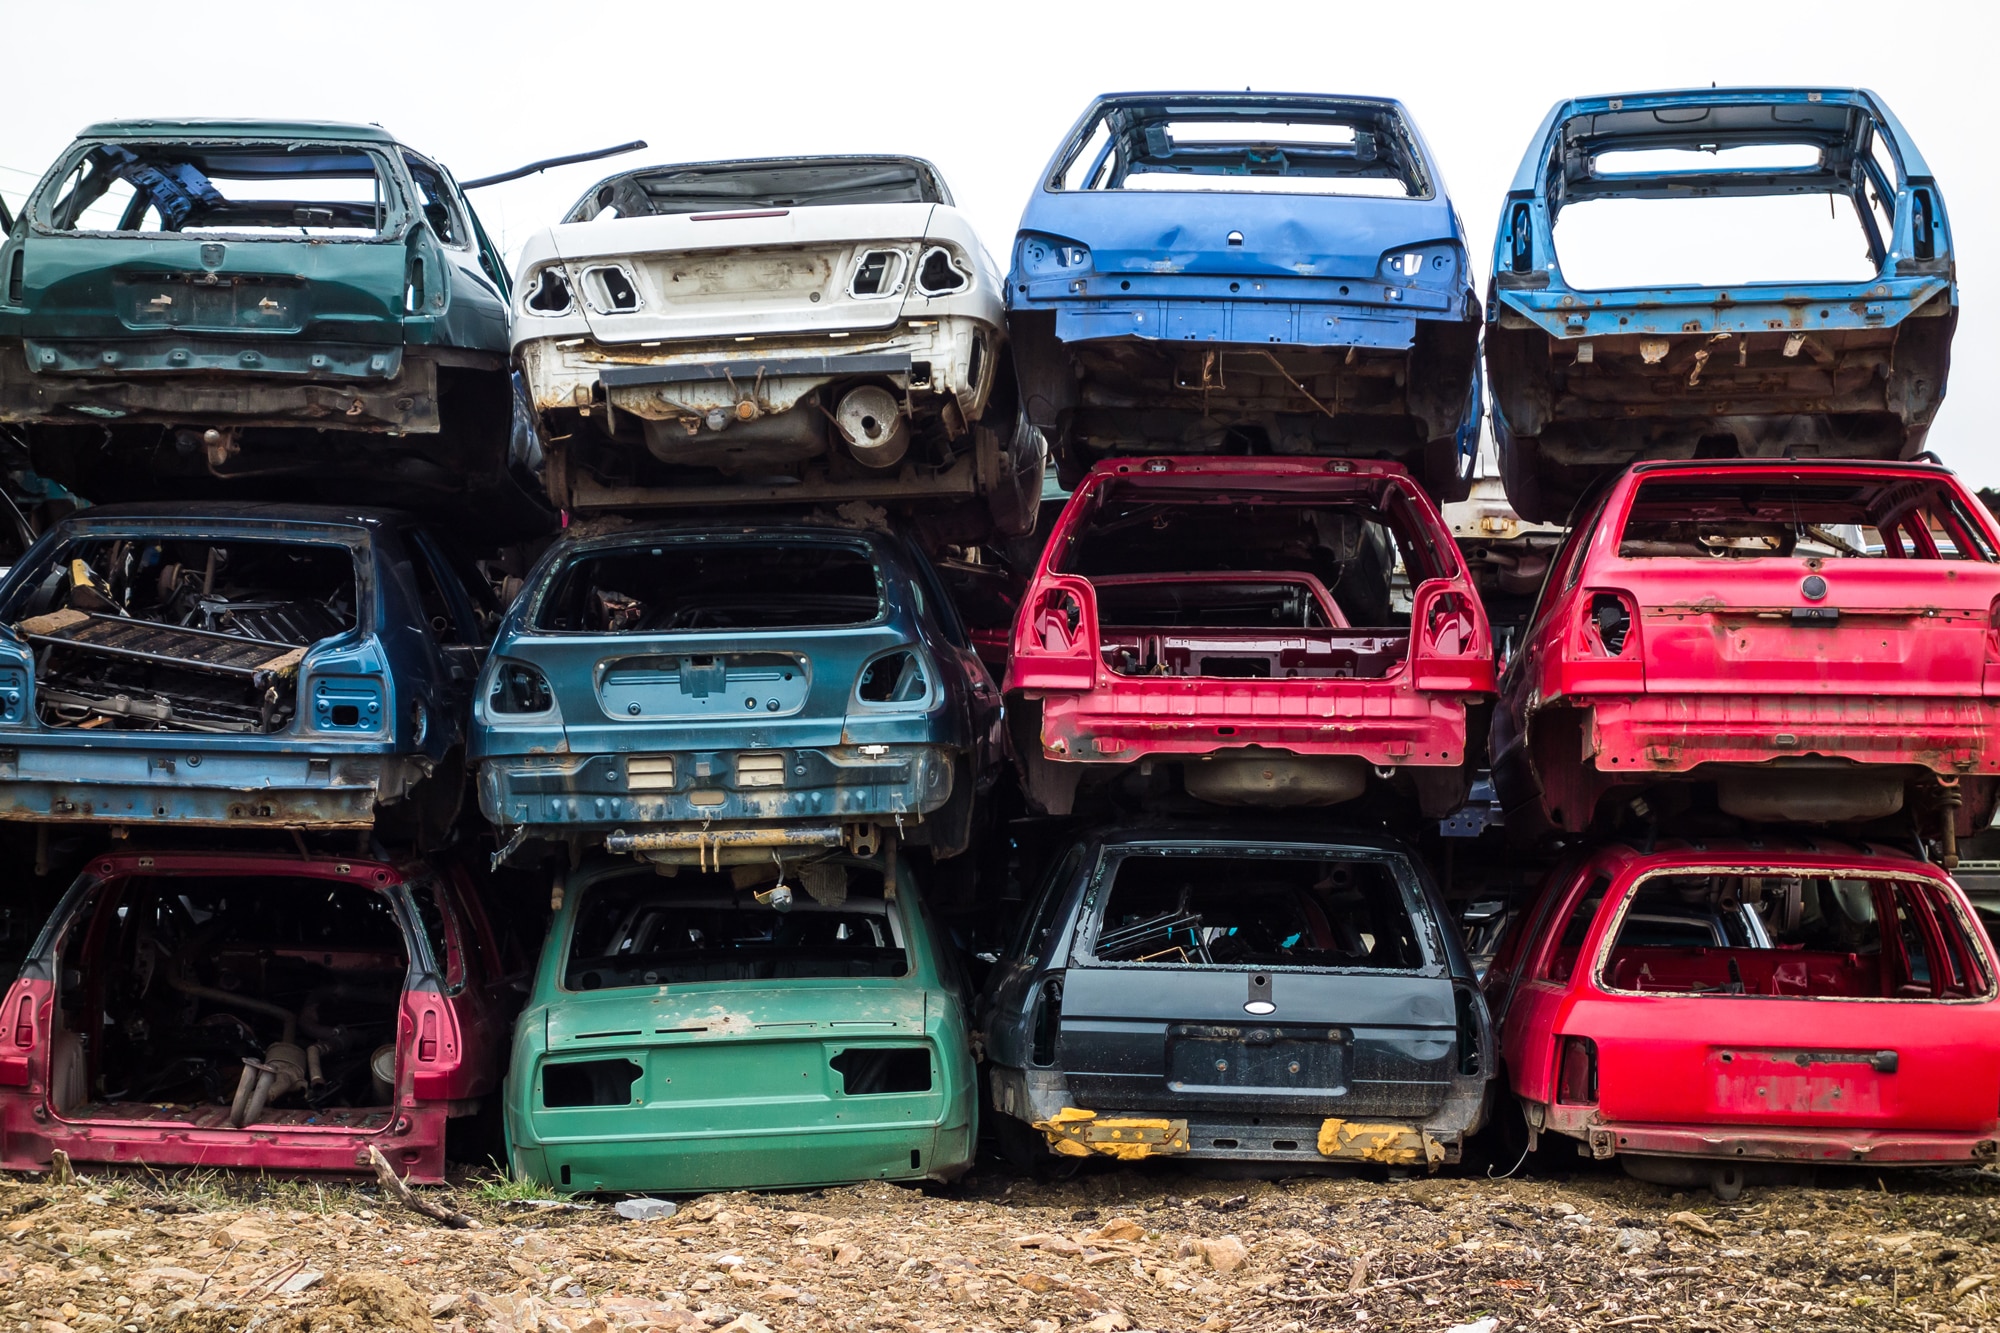 6 Reasons To Buy Parts From  Motors Instead Of A Junkyard